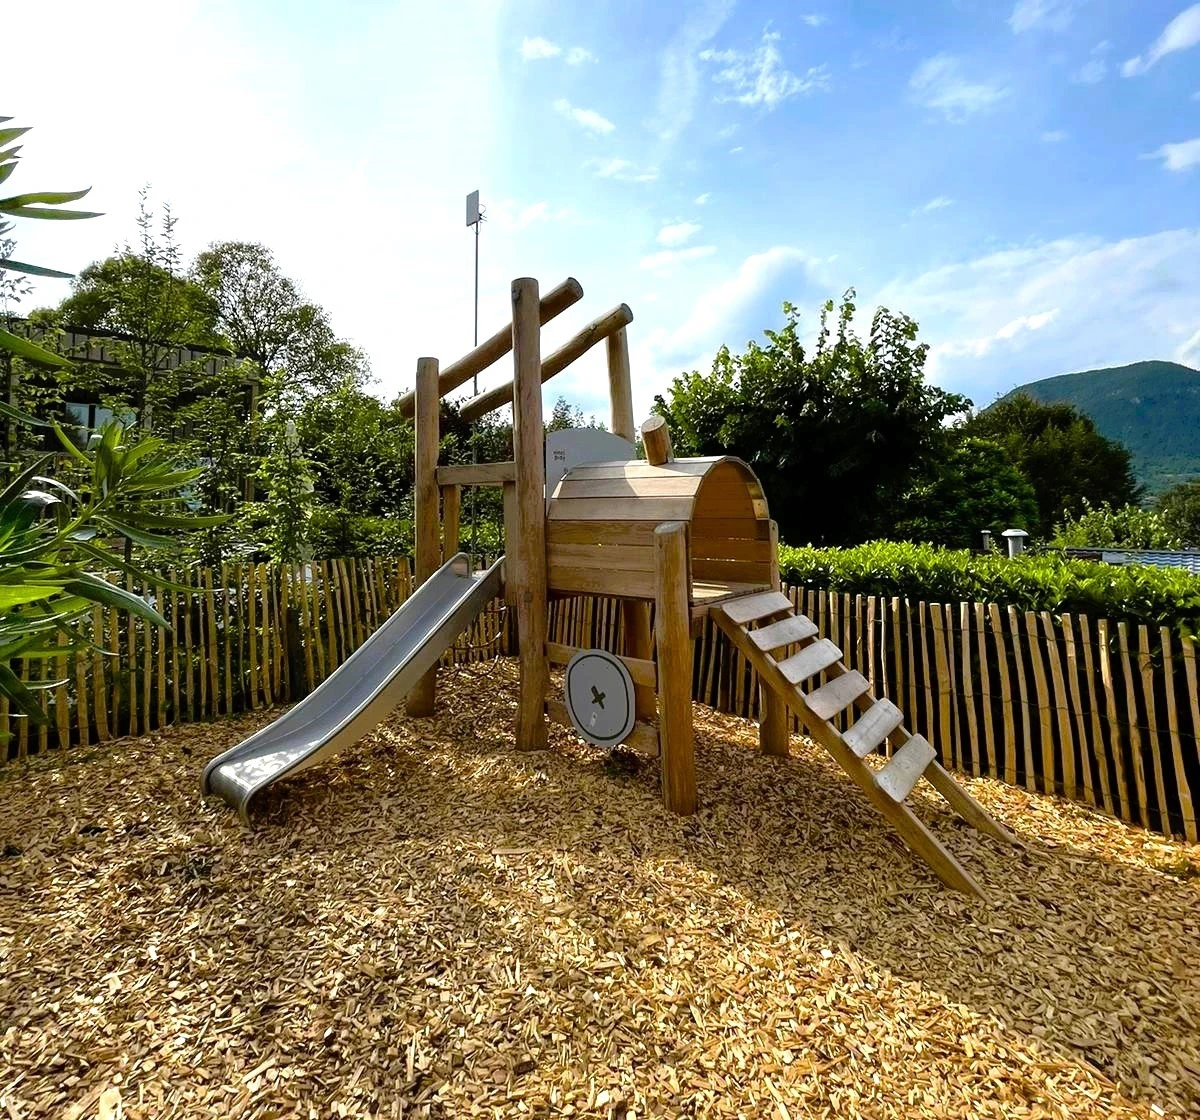 A new playground for the Weekend Glamping Resort!